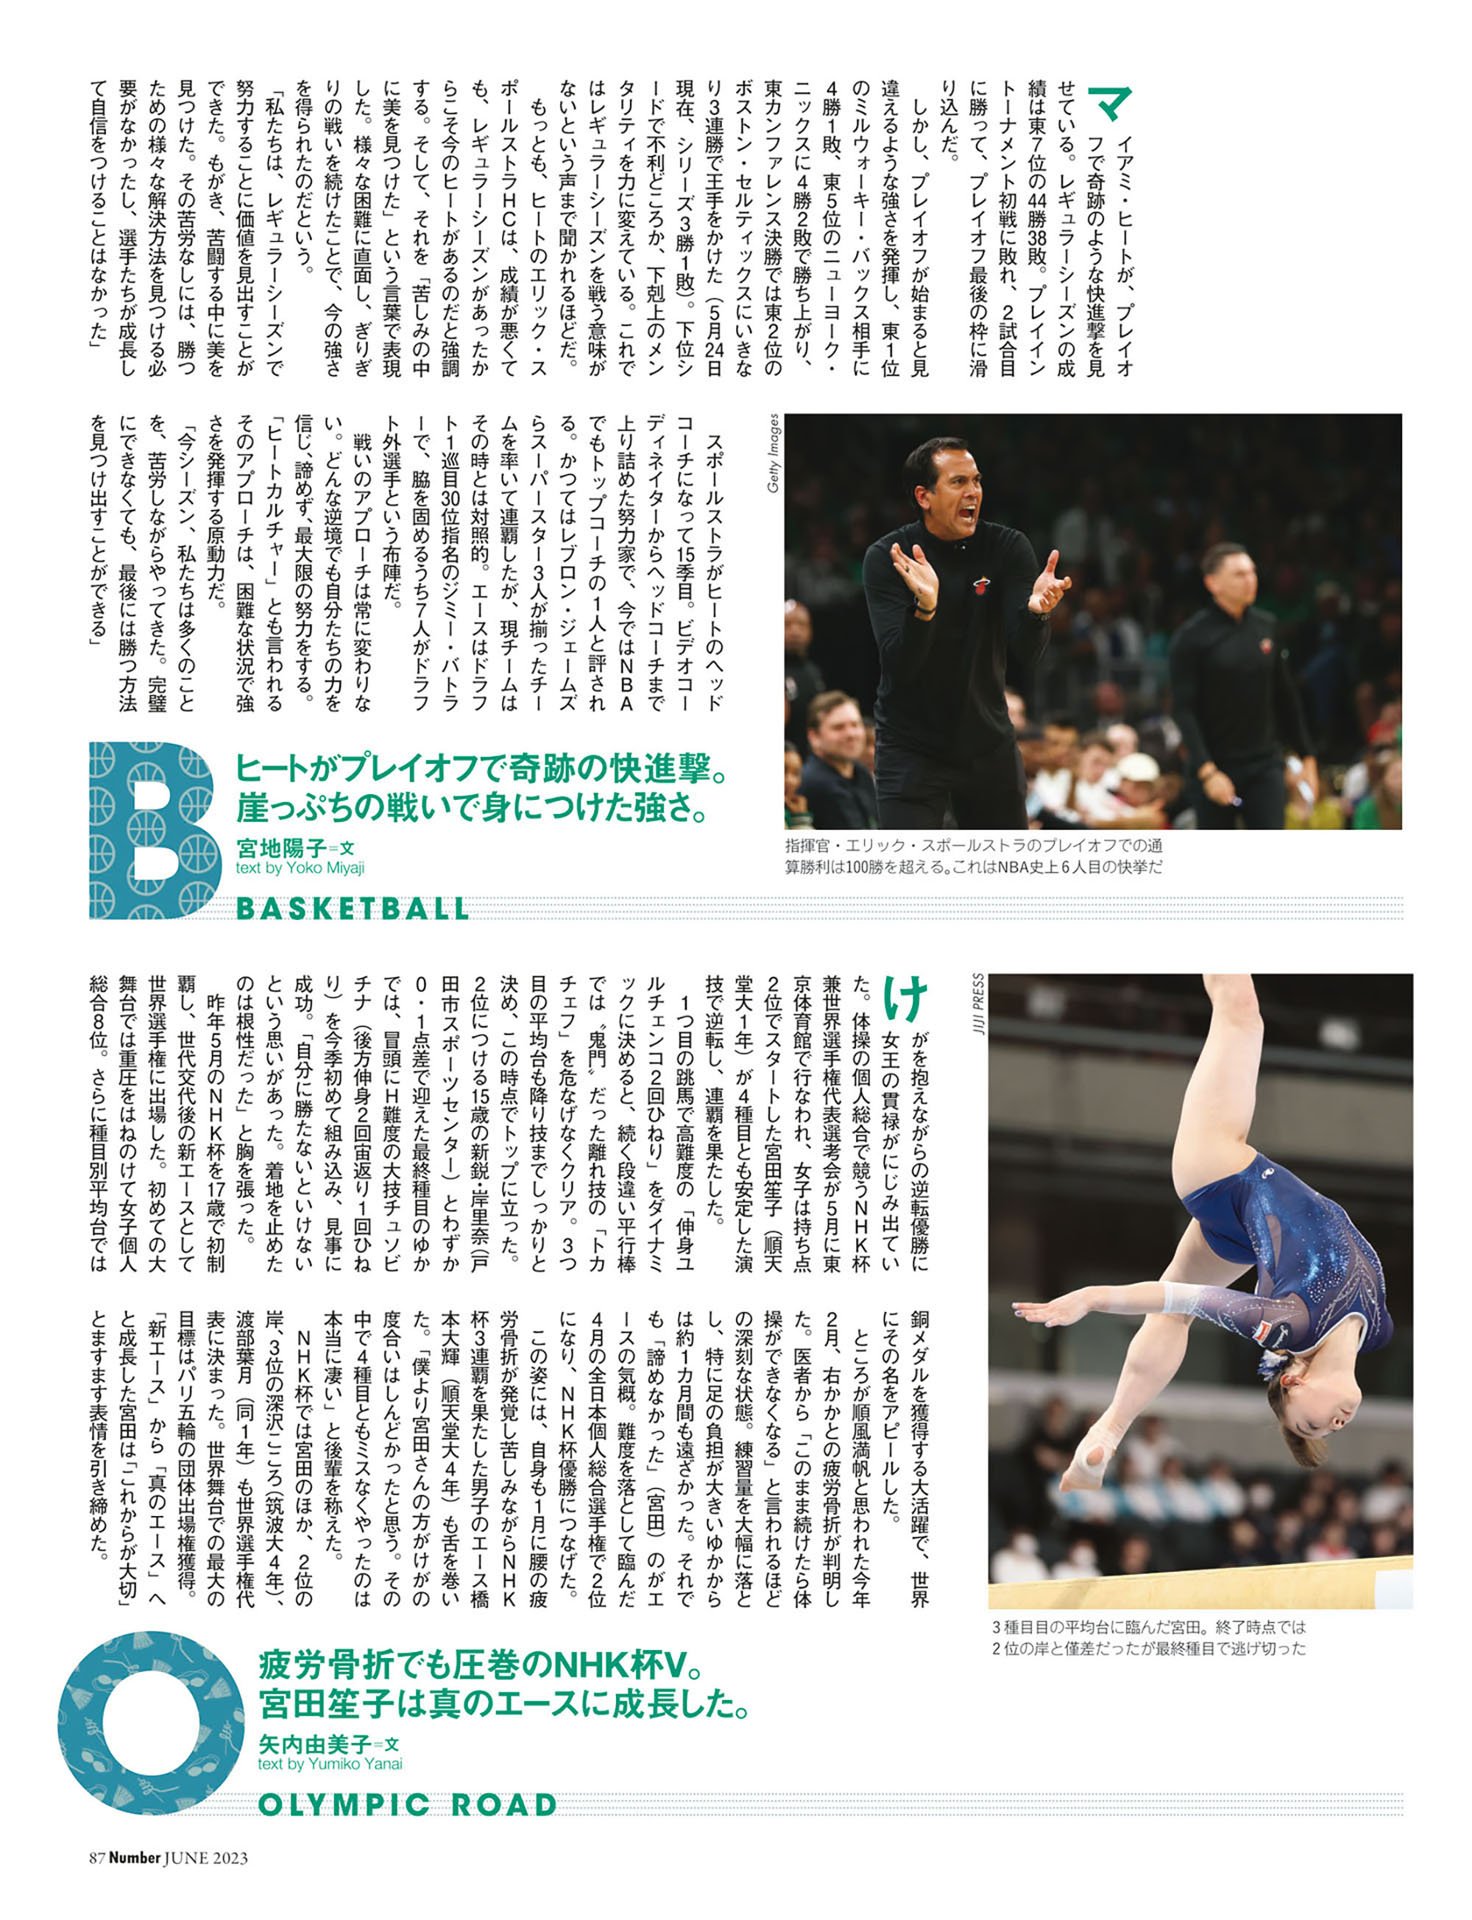 【SCORE CARD】BASKETBALL／OLYMPIC ROAD